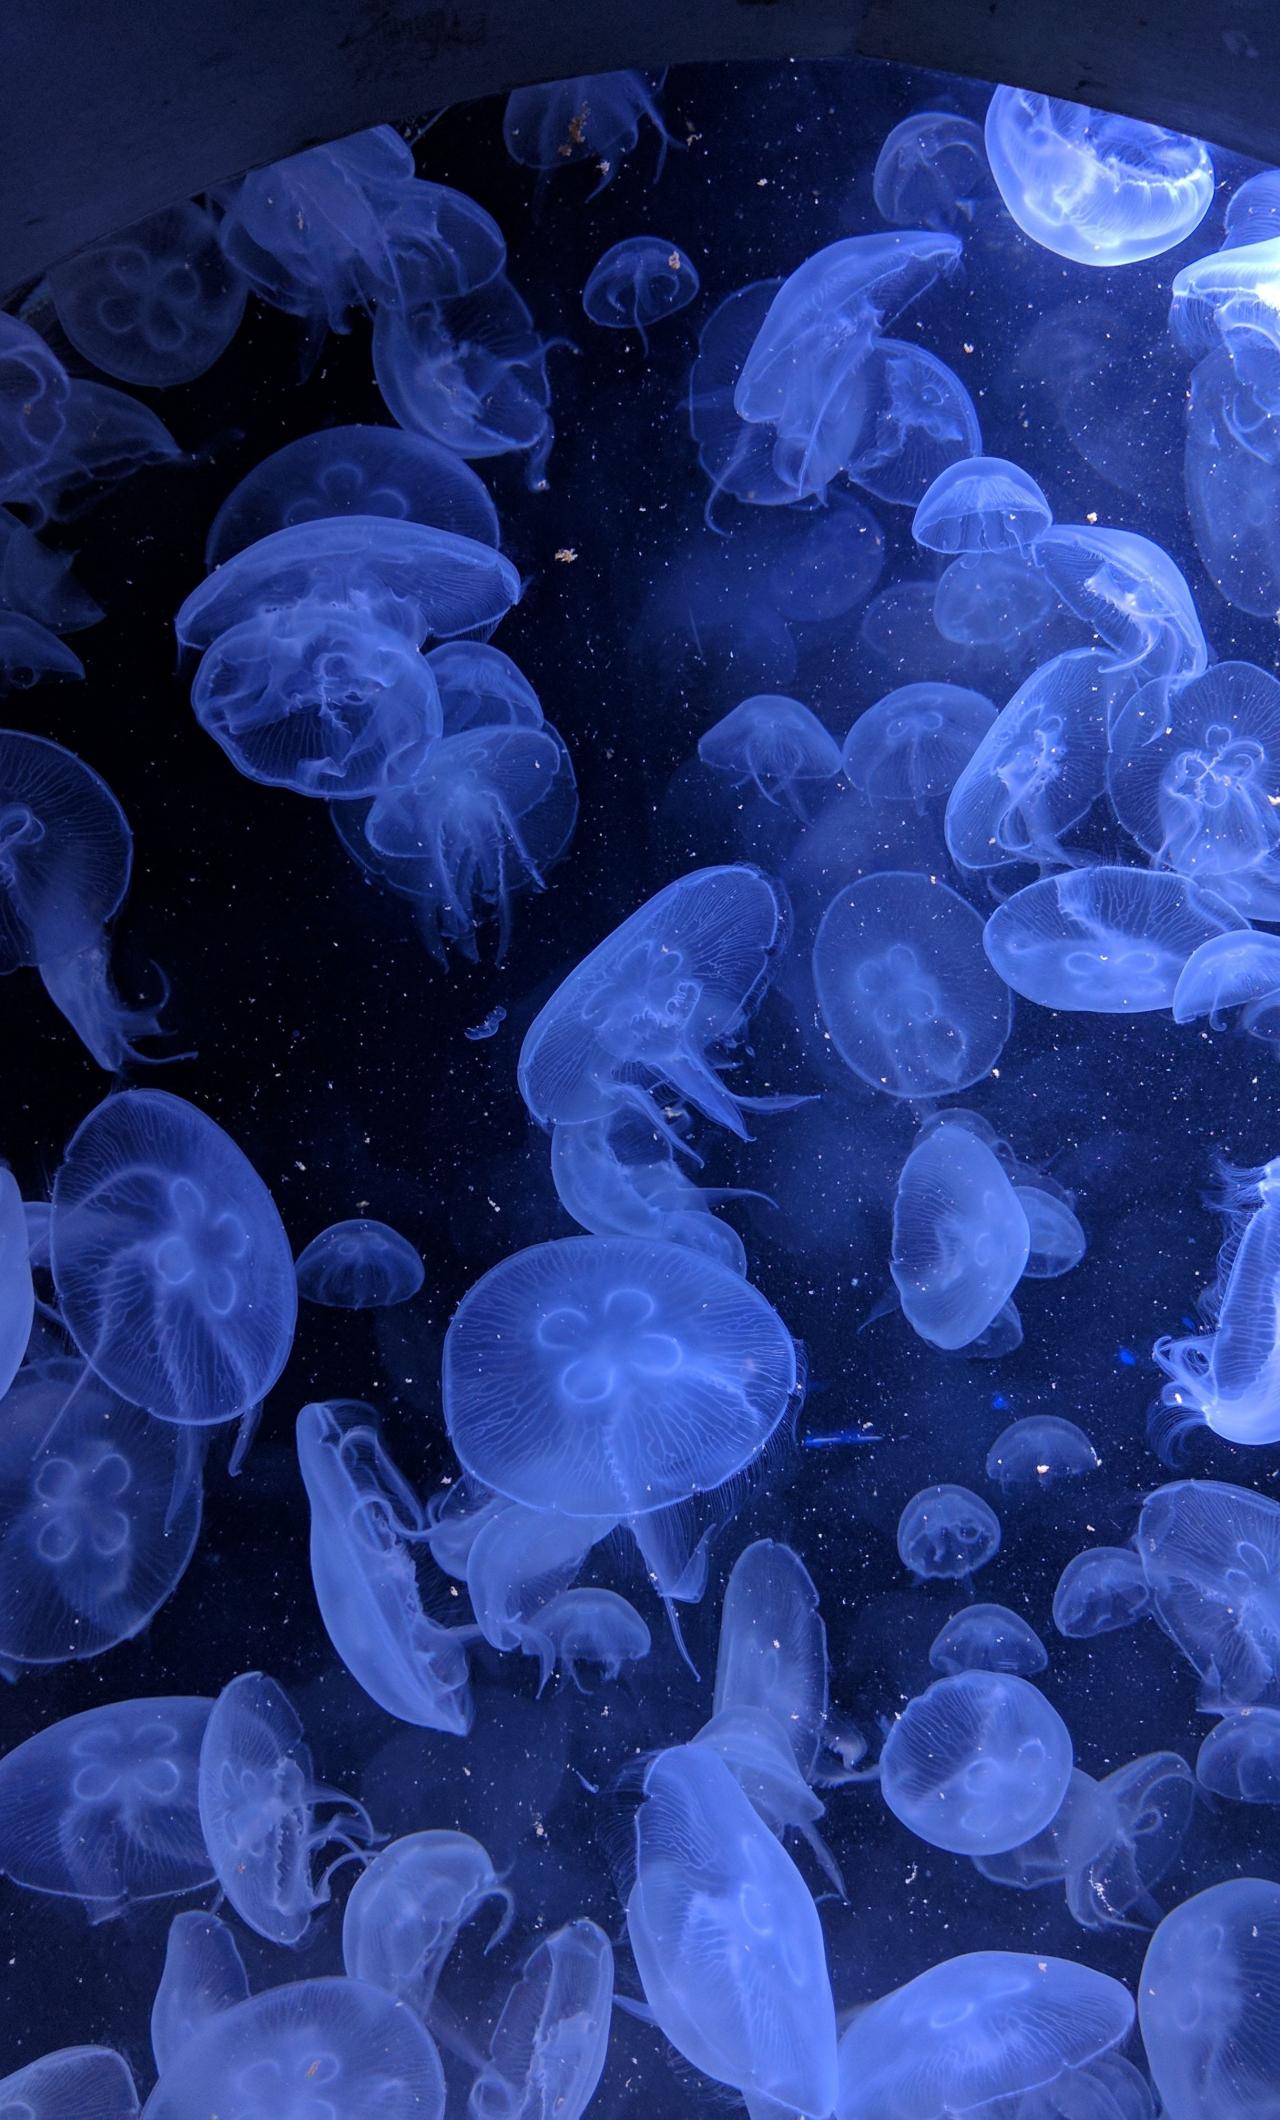 Blue Jellyfish Wallpapers - Top Free Blue Jellyfish Backgrounds ...